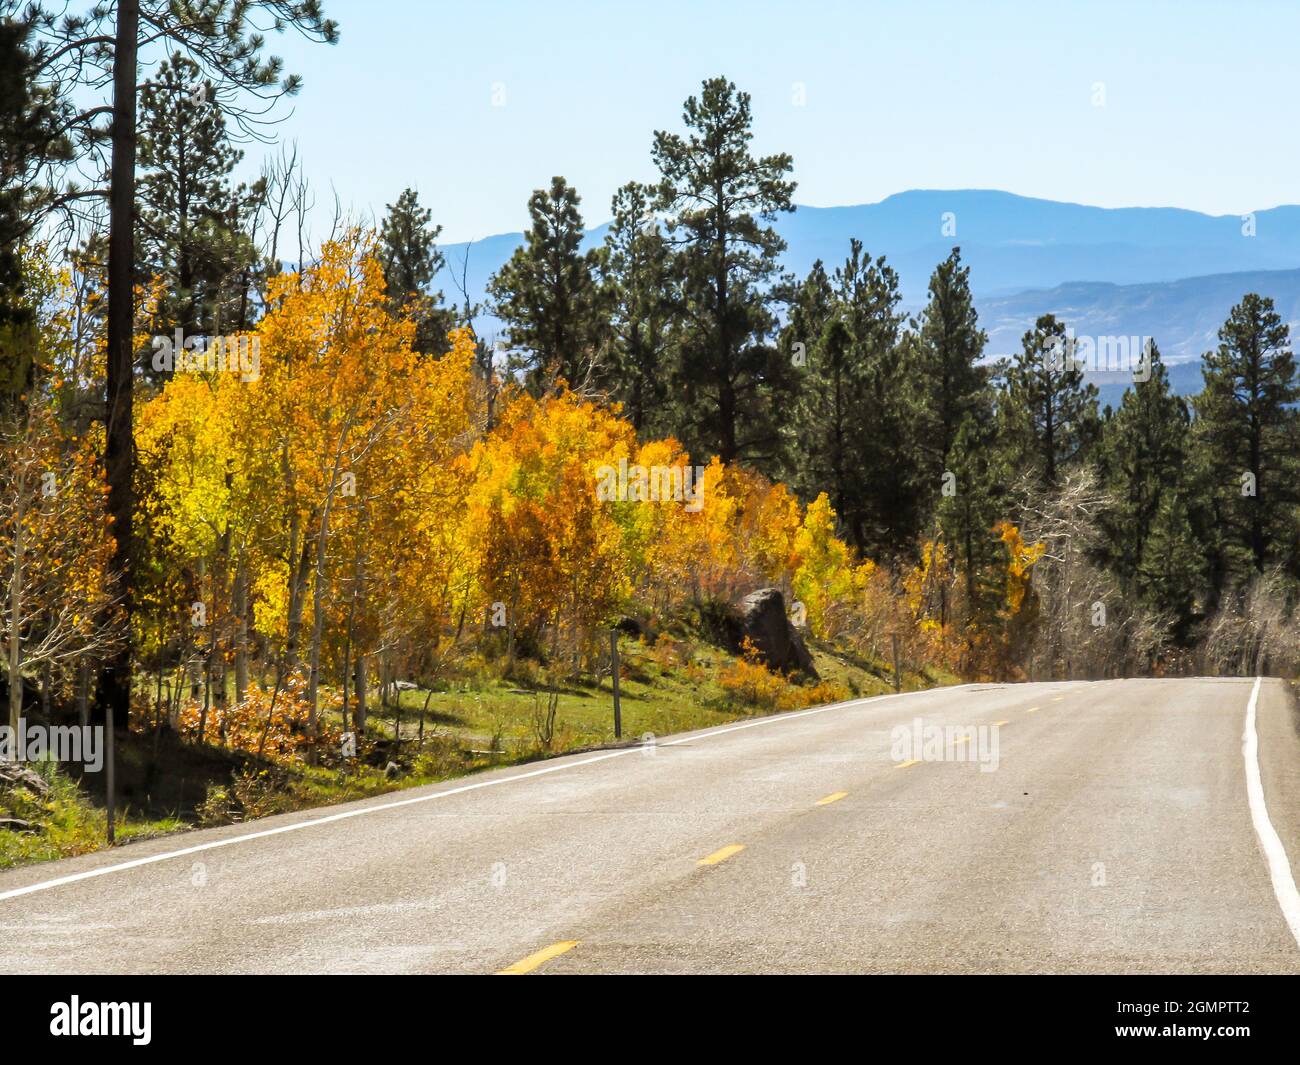 Highway lined with Aspen in their golden fall colors and tall fir and pine trees Stock Photo